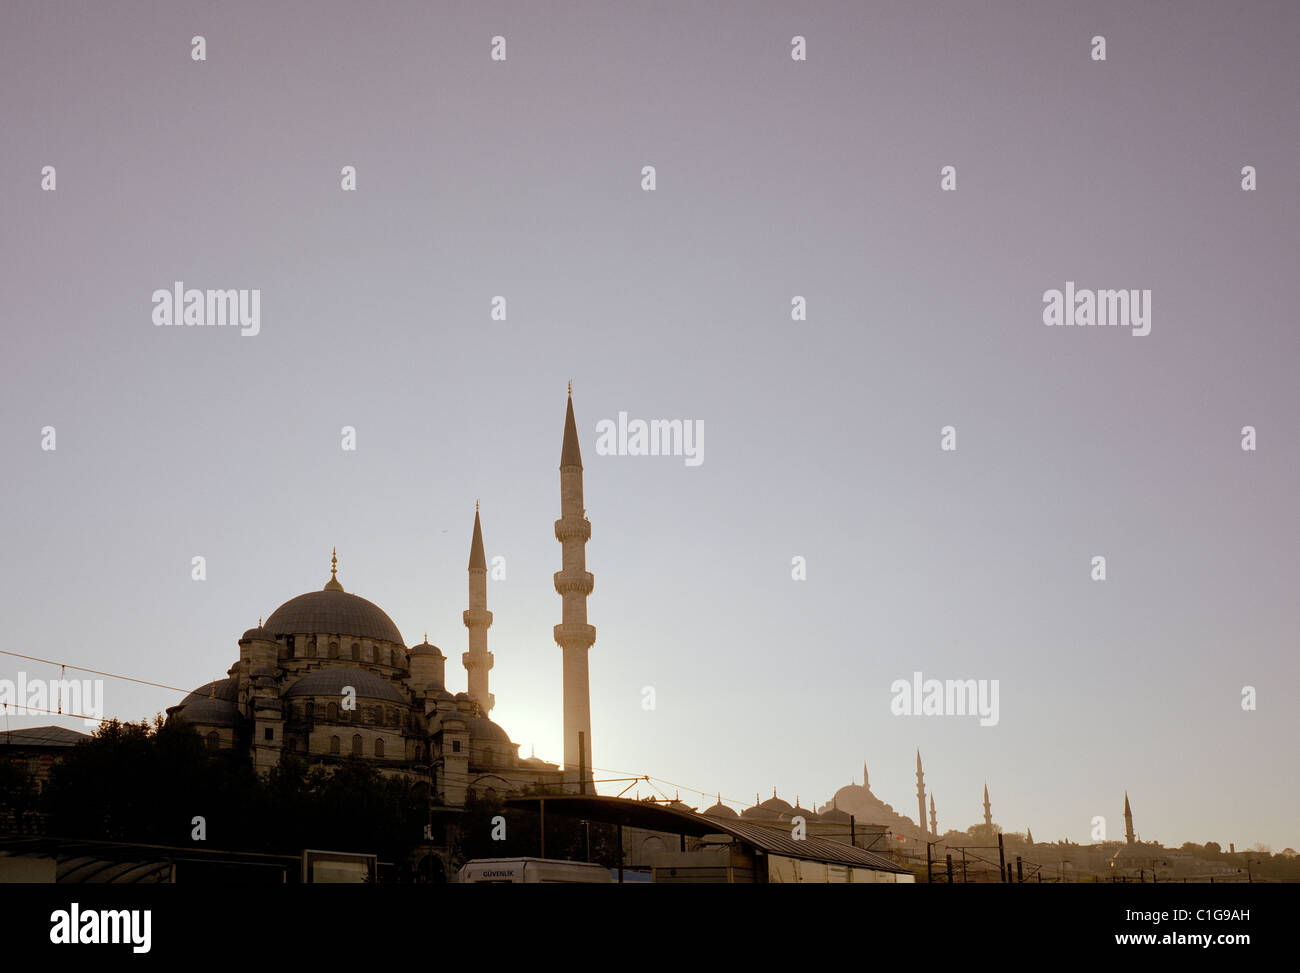 Twilight at the New Mosque Yeni Camii in Istanbul in Turkey in Middle East Asia. Sunset Dusk Ethereal City Sky Minaret Architecture Escapism Travel Stock Photo